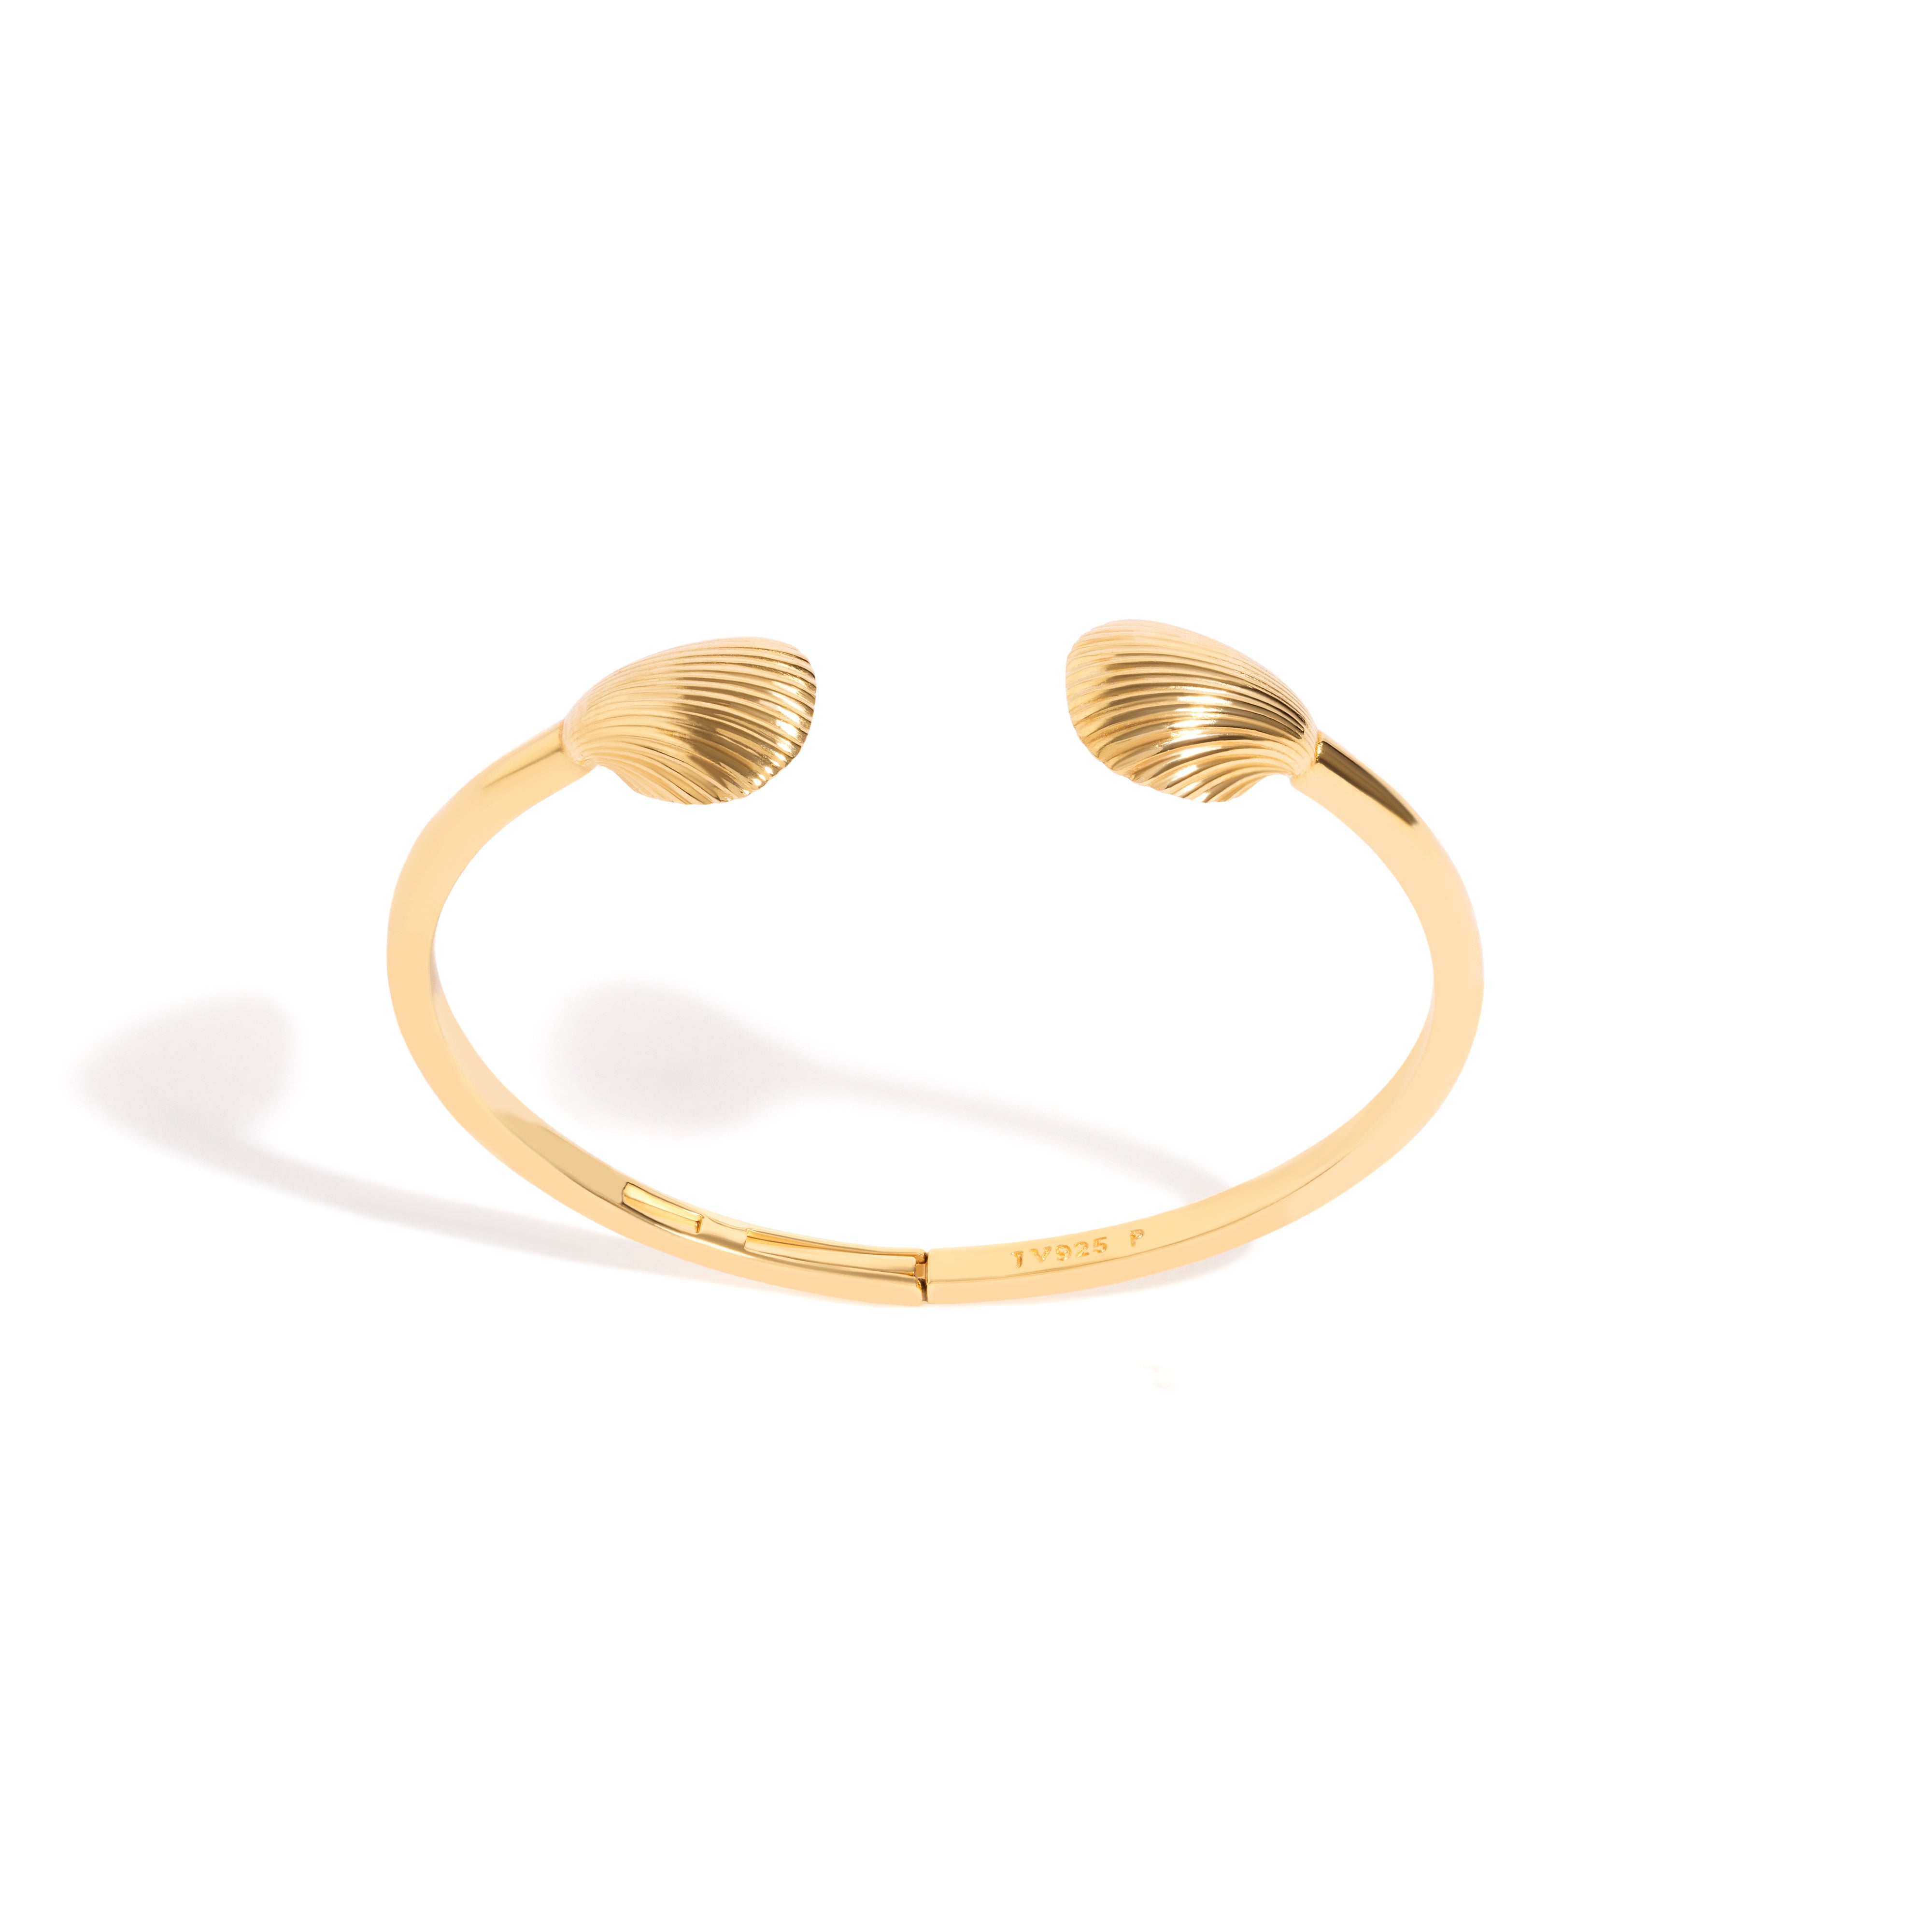 MARE BRACELET IN 18K YELLOW GOLD PLATED SILVER